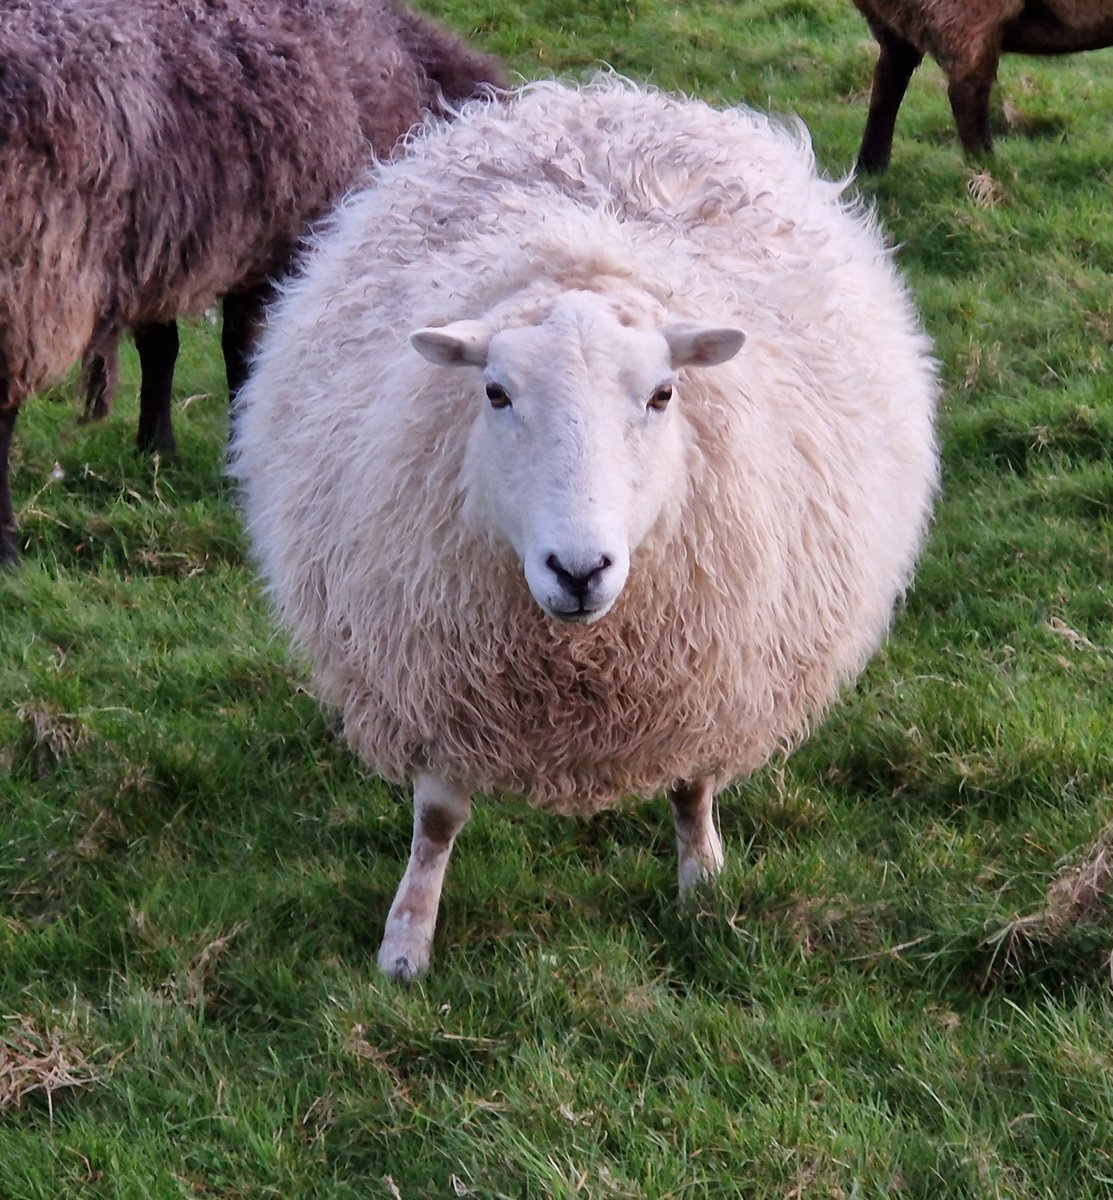 Wilful Willow has wintered well, goodness knows what size she'll be again once the grass growth kicks in!!

#animalsanctuary #sheep365 #welshsheep #nonprofit #amazonwishlist #animallovers #foreverhome 

woollypatchworksheepsanctuary.uk